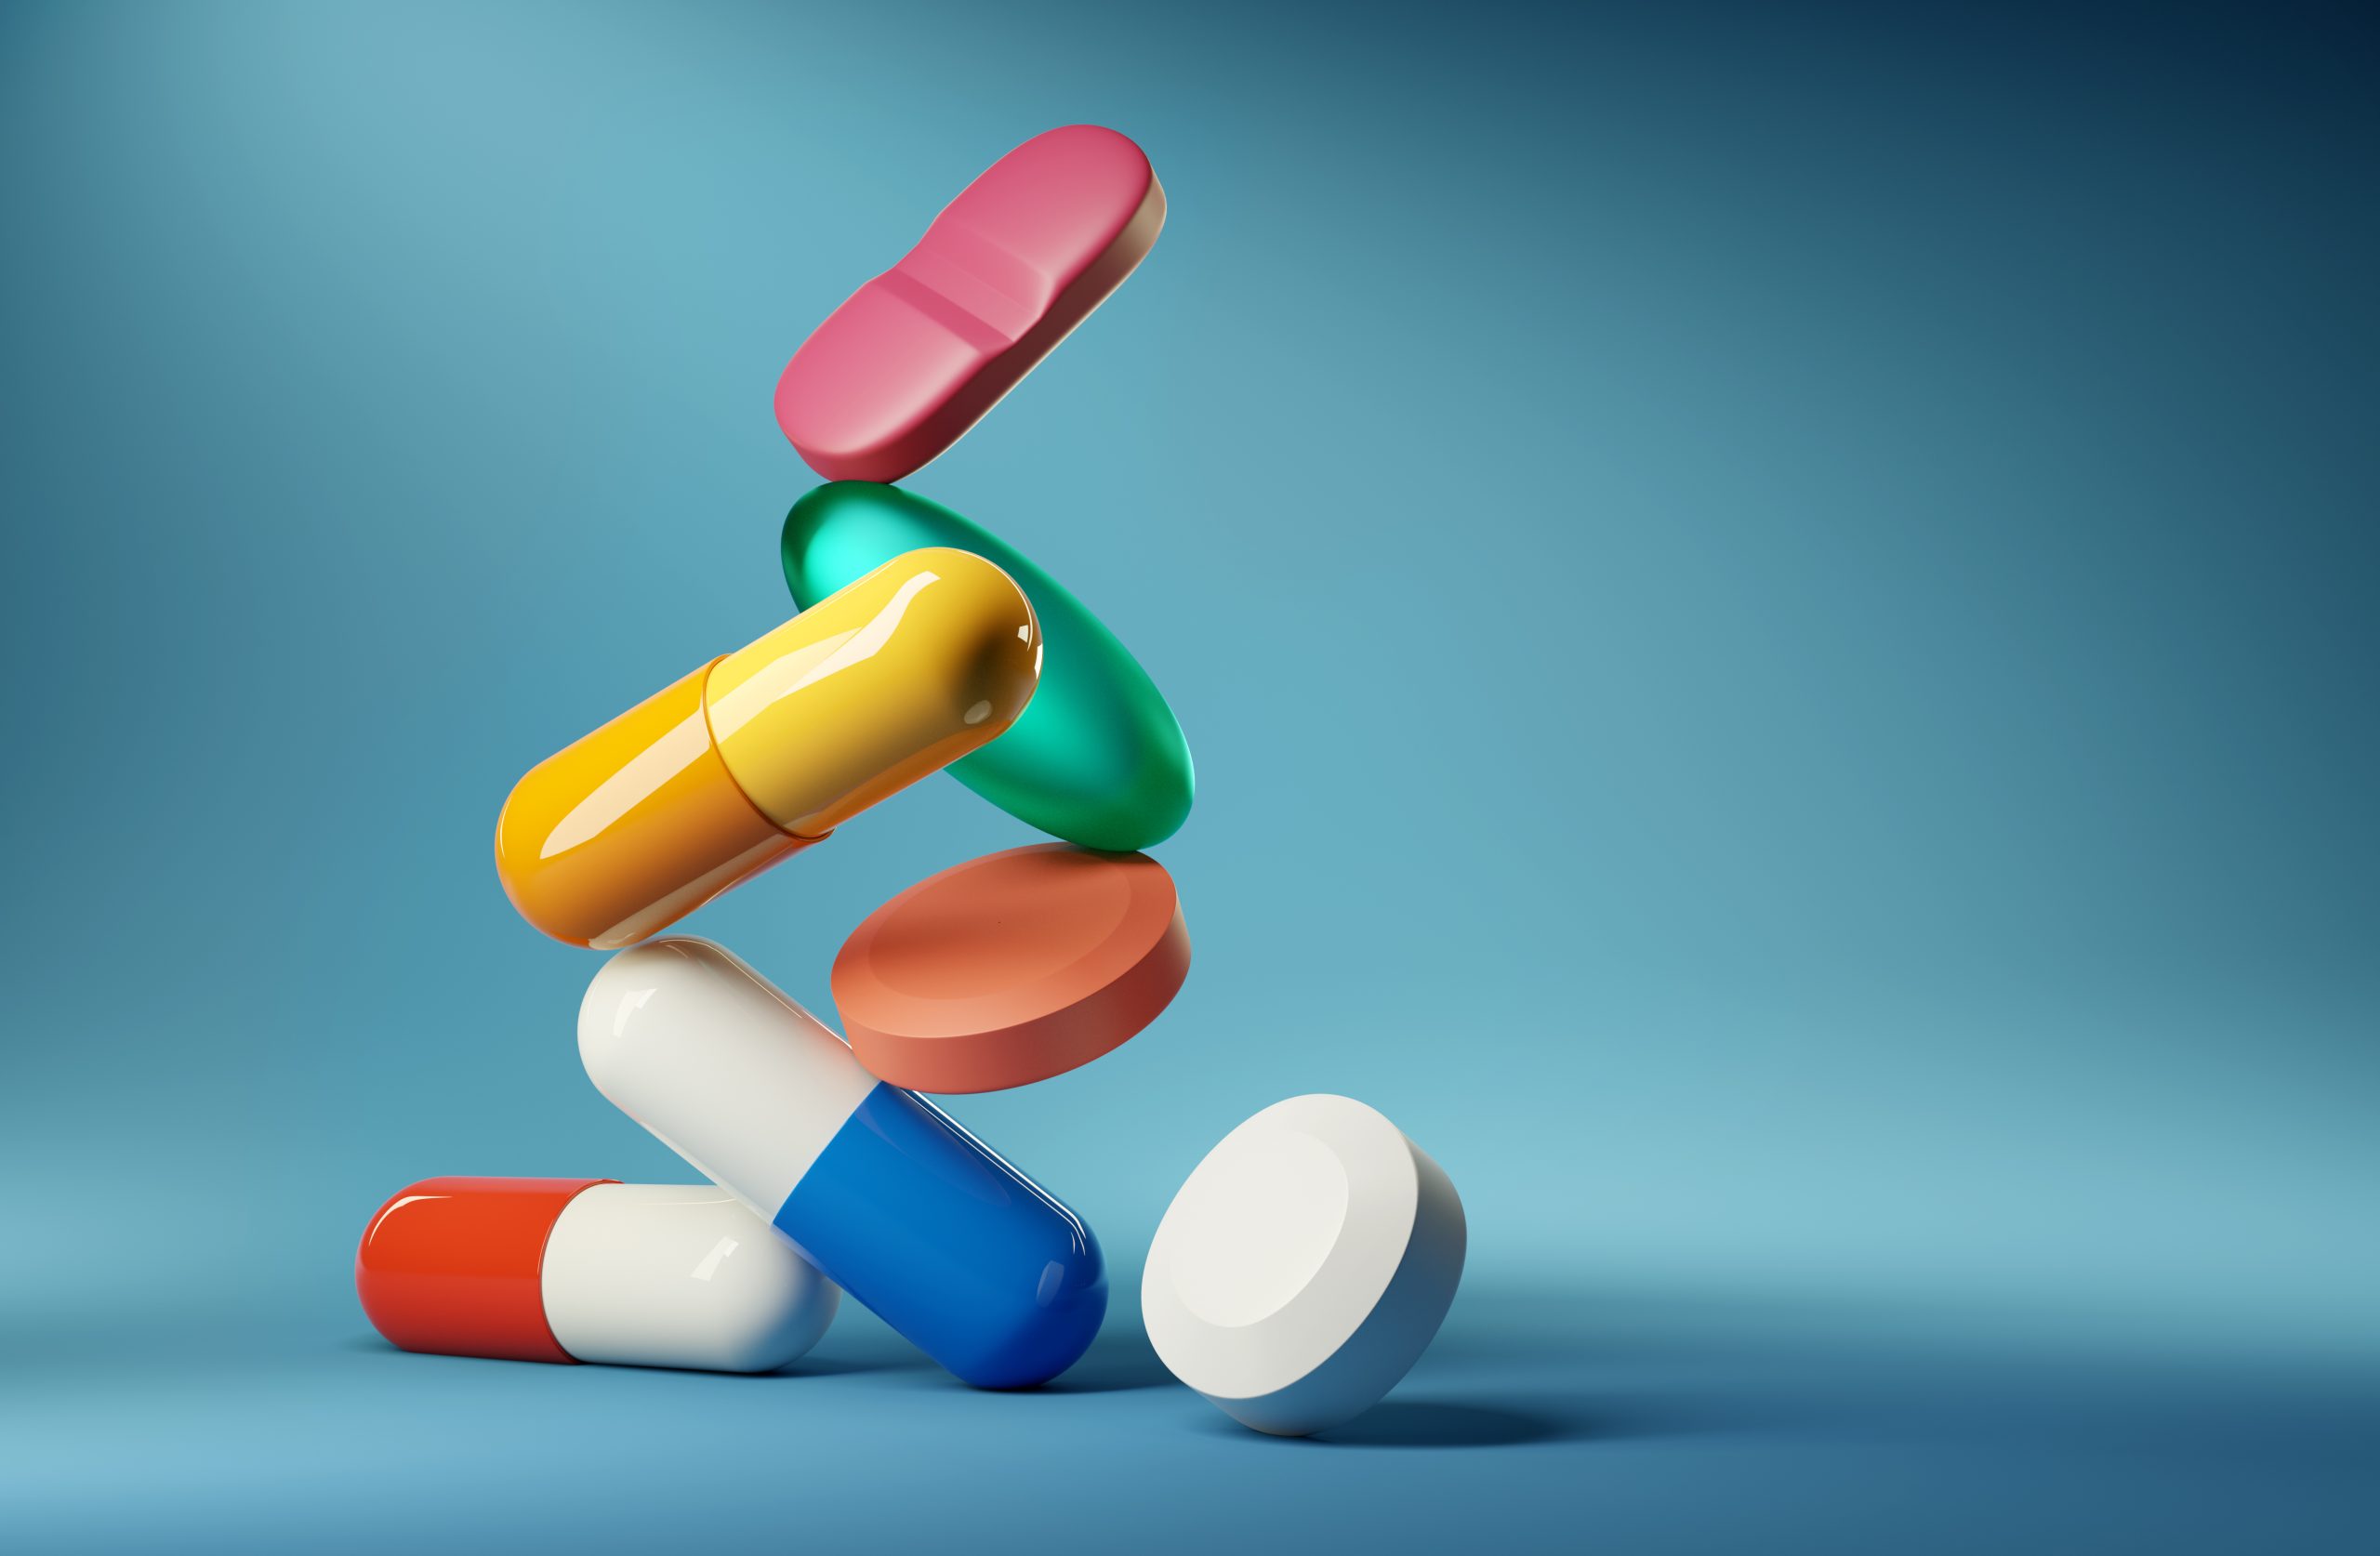 a variety of colorful pills, including capsules and tablets, representing medications often linked with substance use disorders and dual diagnosis in individuals with severe mental illness